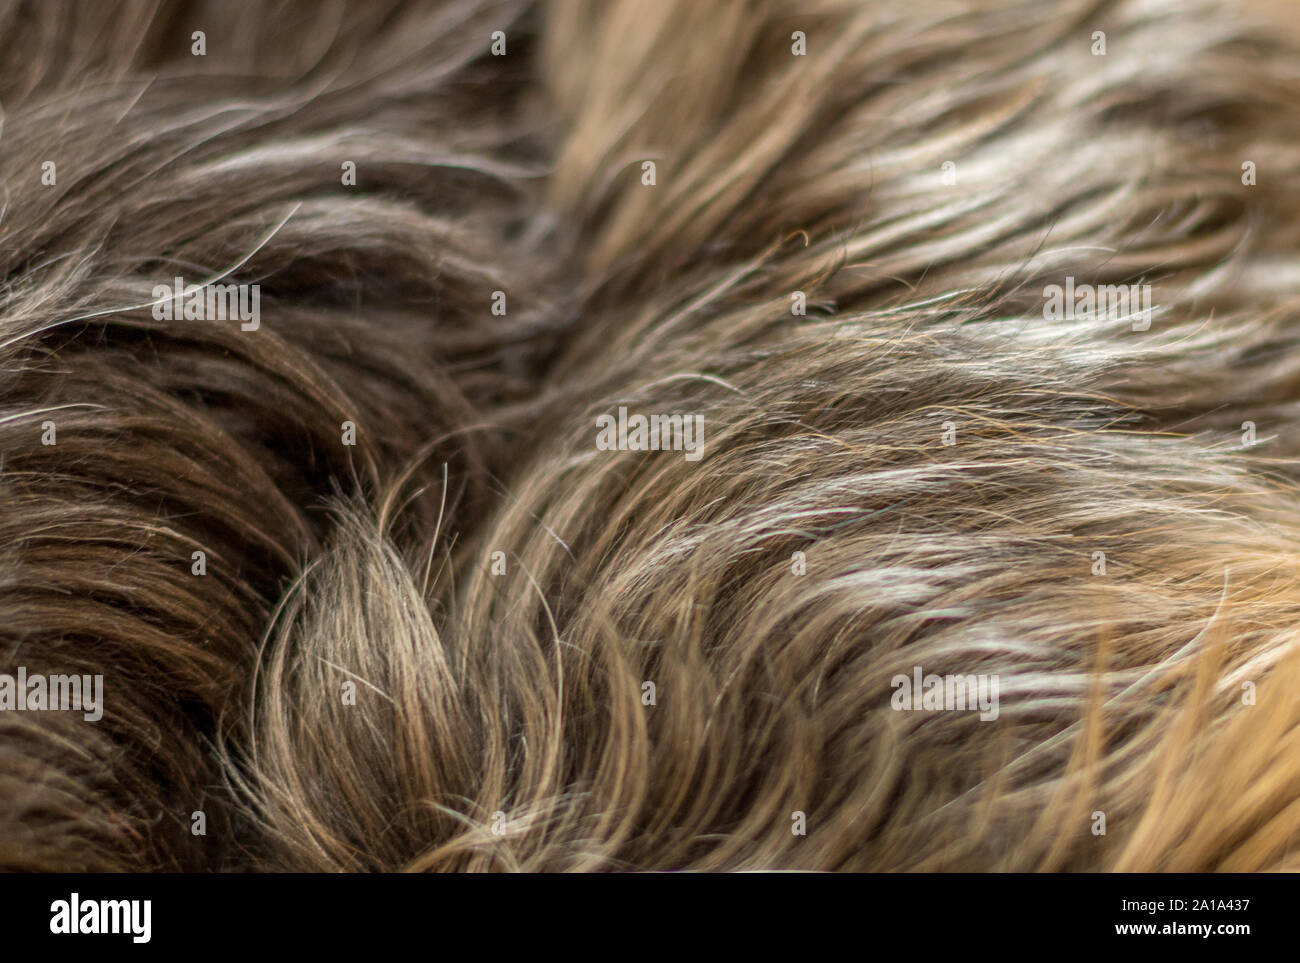 Close Up View Of The Felted Of Shiny Healthy Dog Dark Brown Hair